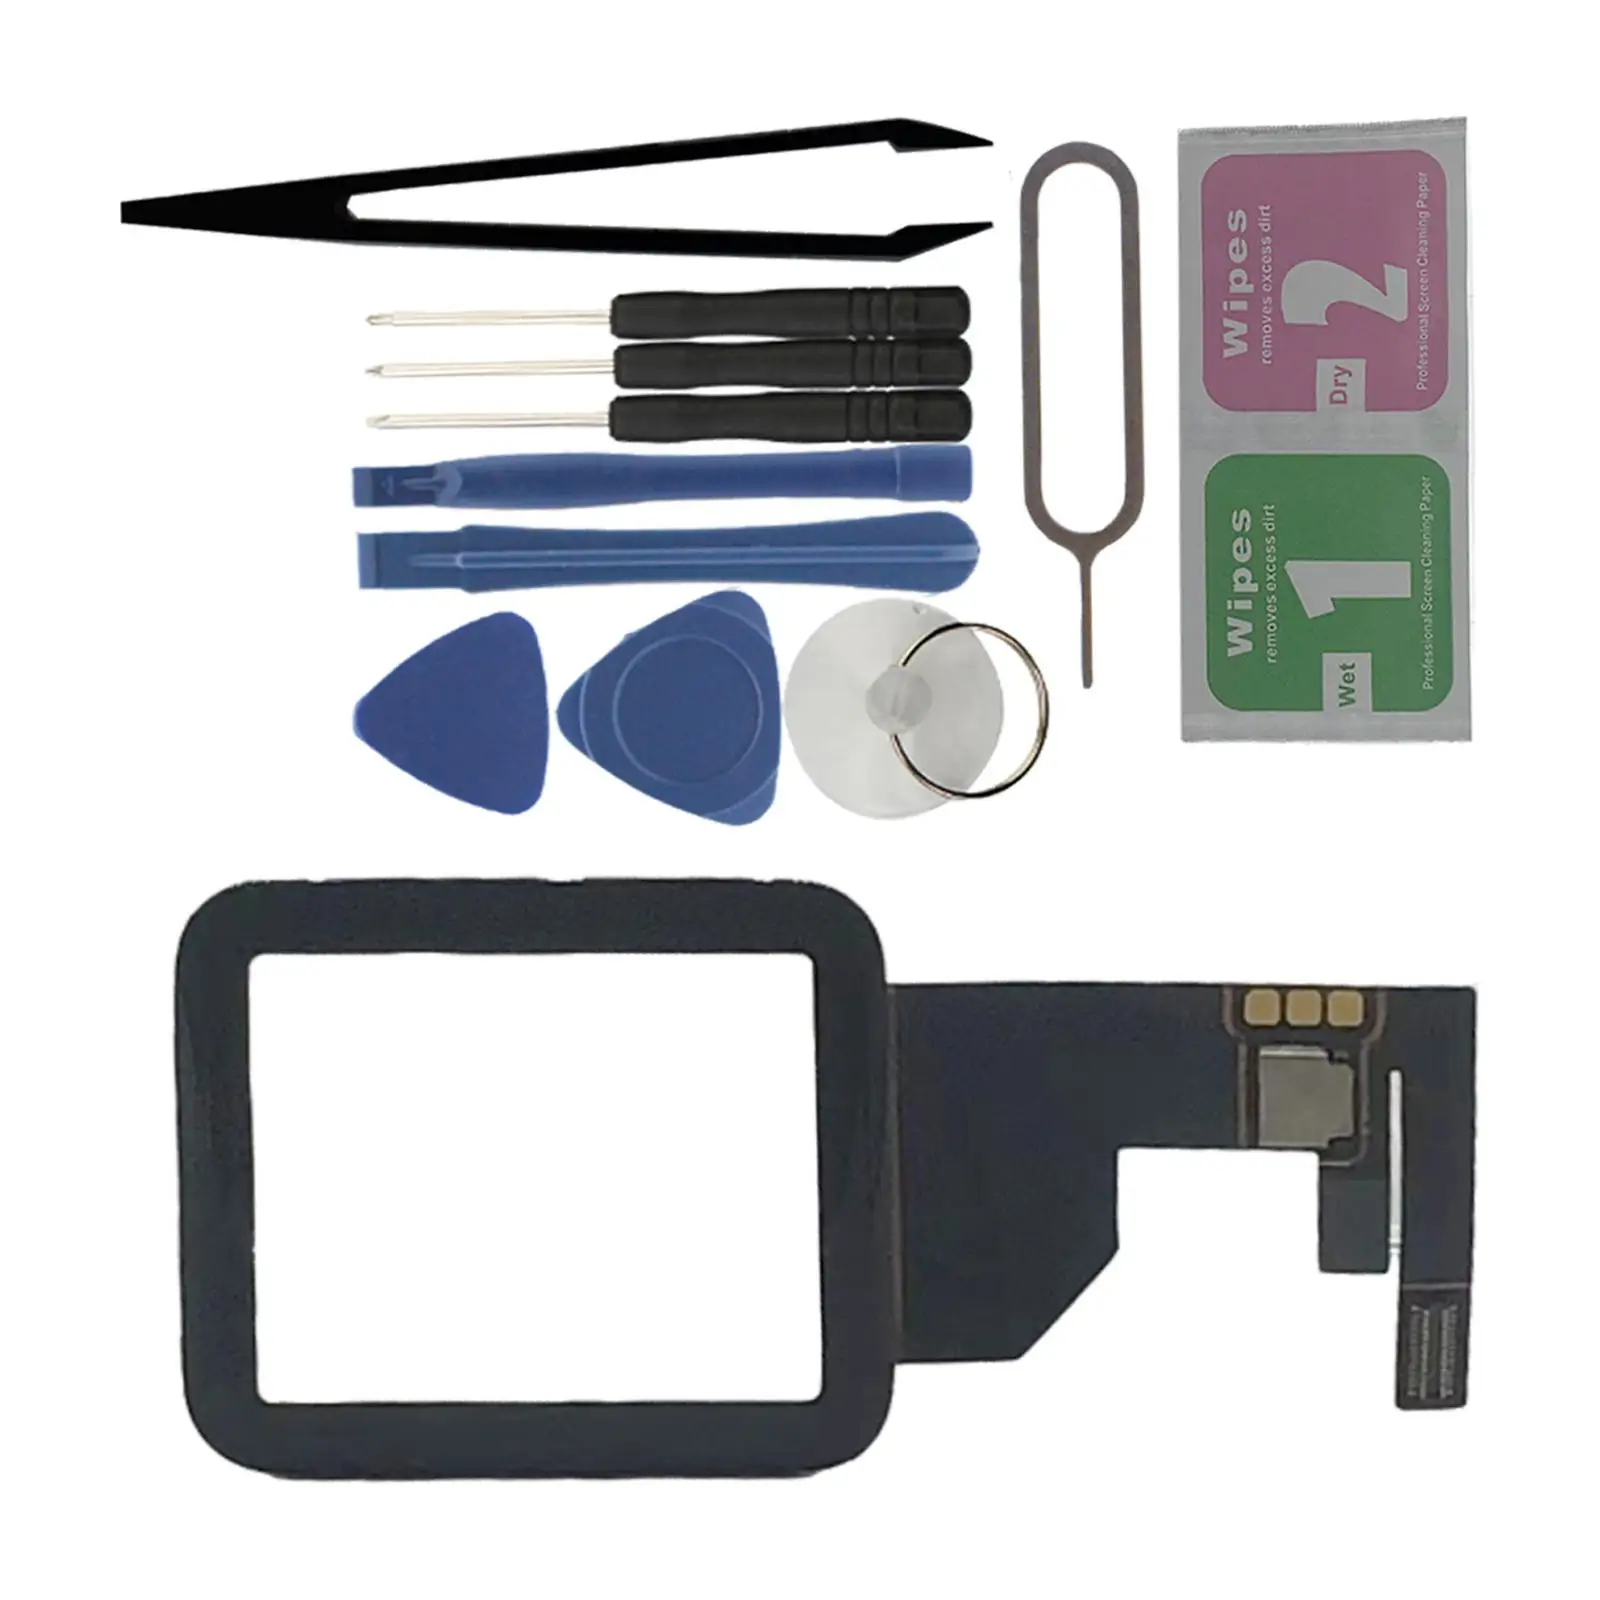 Screen Digitizer Replacement Professional for S1 38mm Smartwatch Accessory